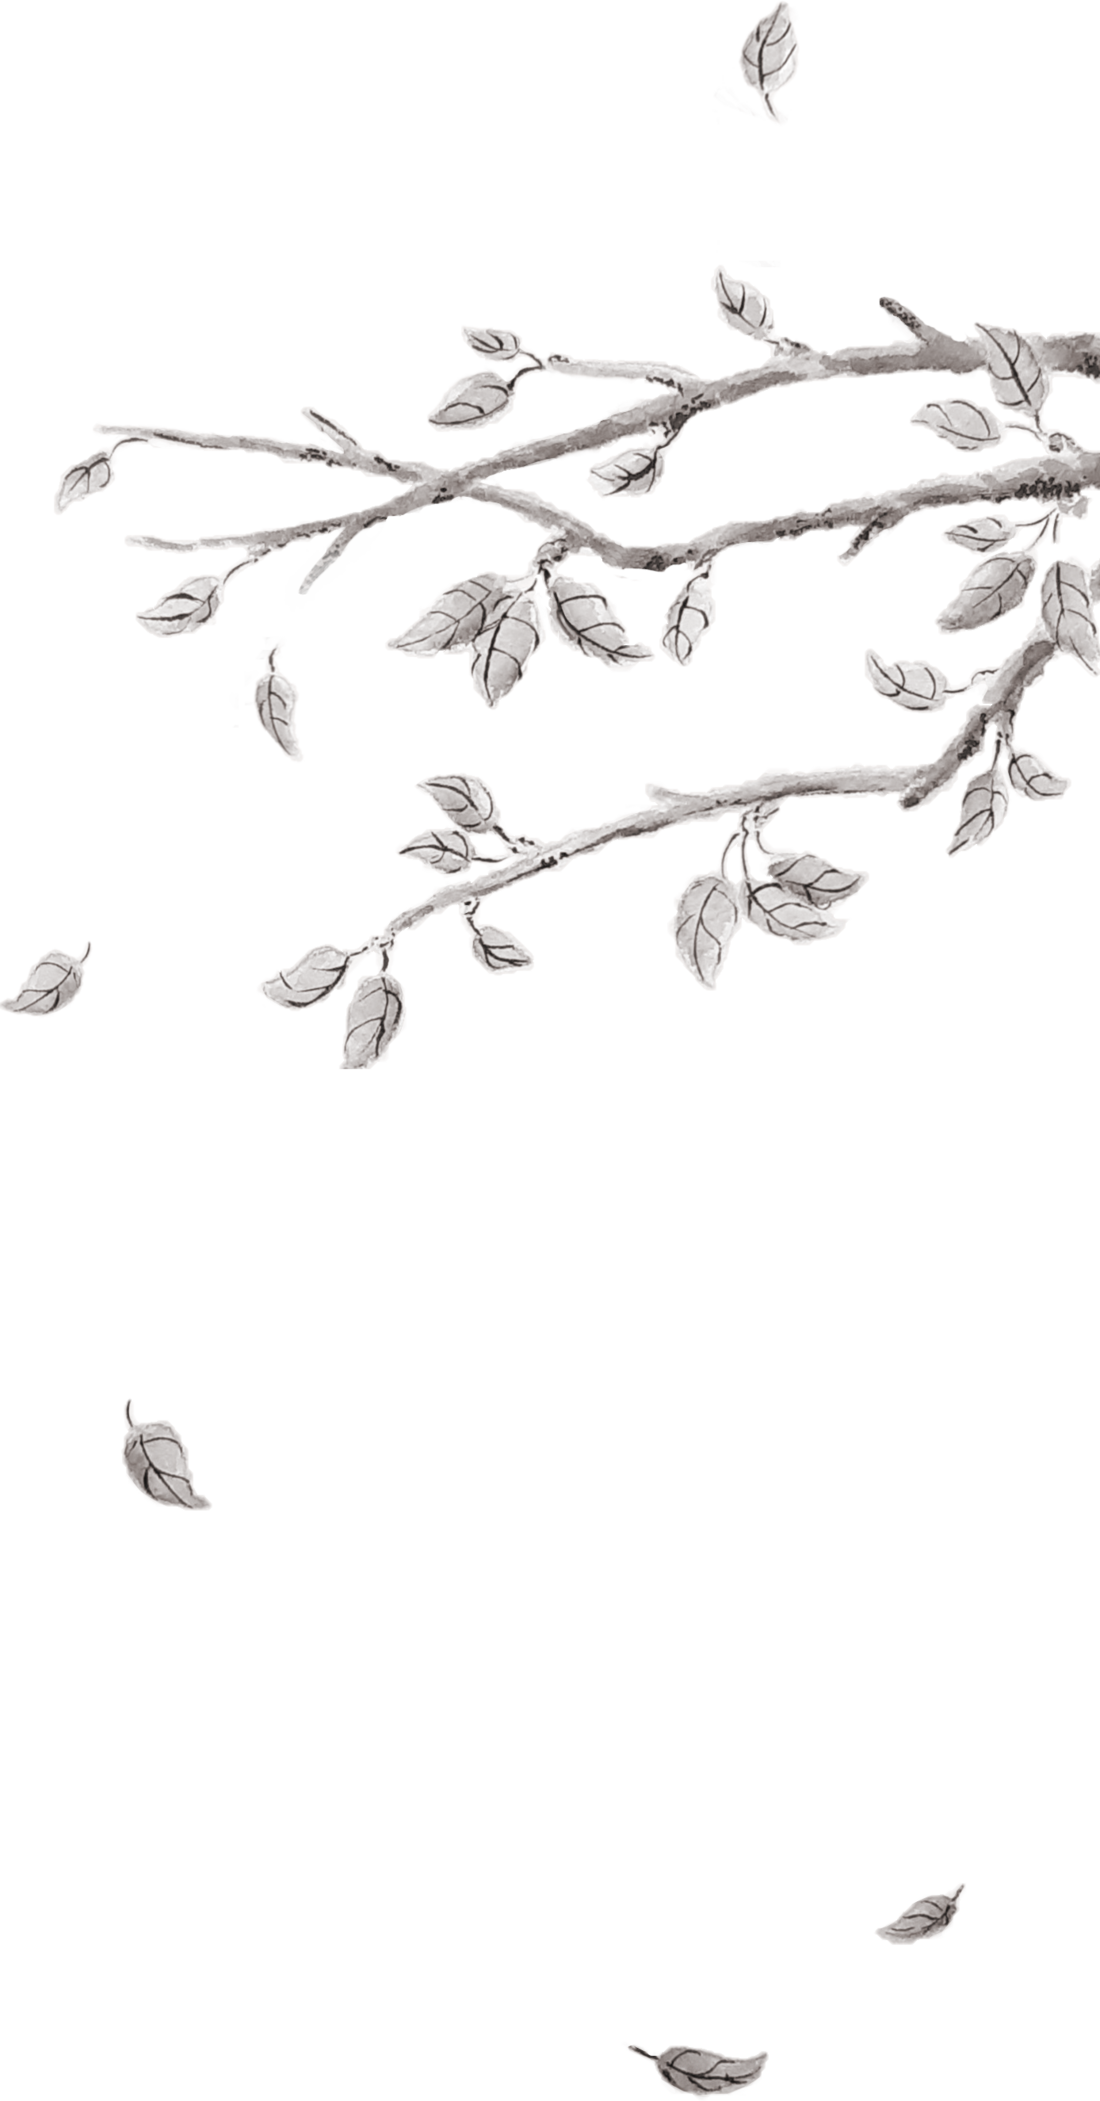 Black and white ink painting of a few branches with leaves swaying playfully in the breeze, some of them falling down.